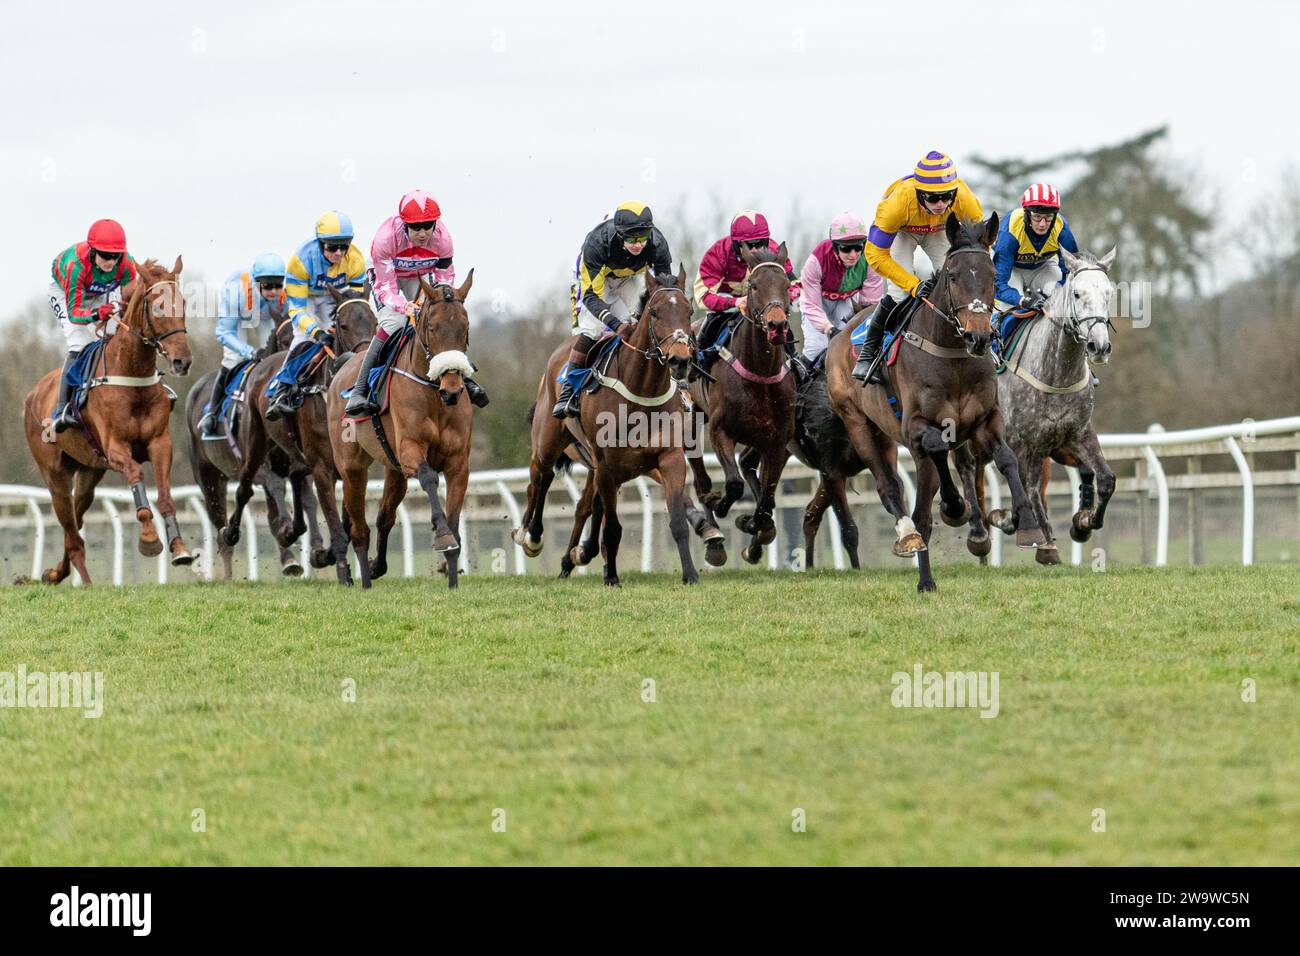 Could Talkaboutit, ridden by Brendan Powell and trained by Colin Tizzard, wins the handicap hurdle at Wincanton, March 10th 2022 Stock Photo